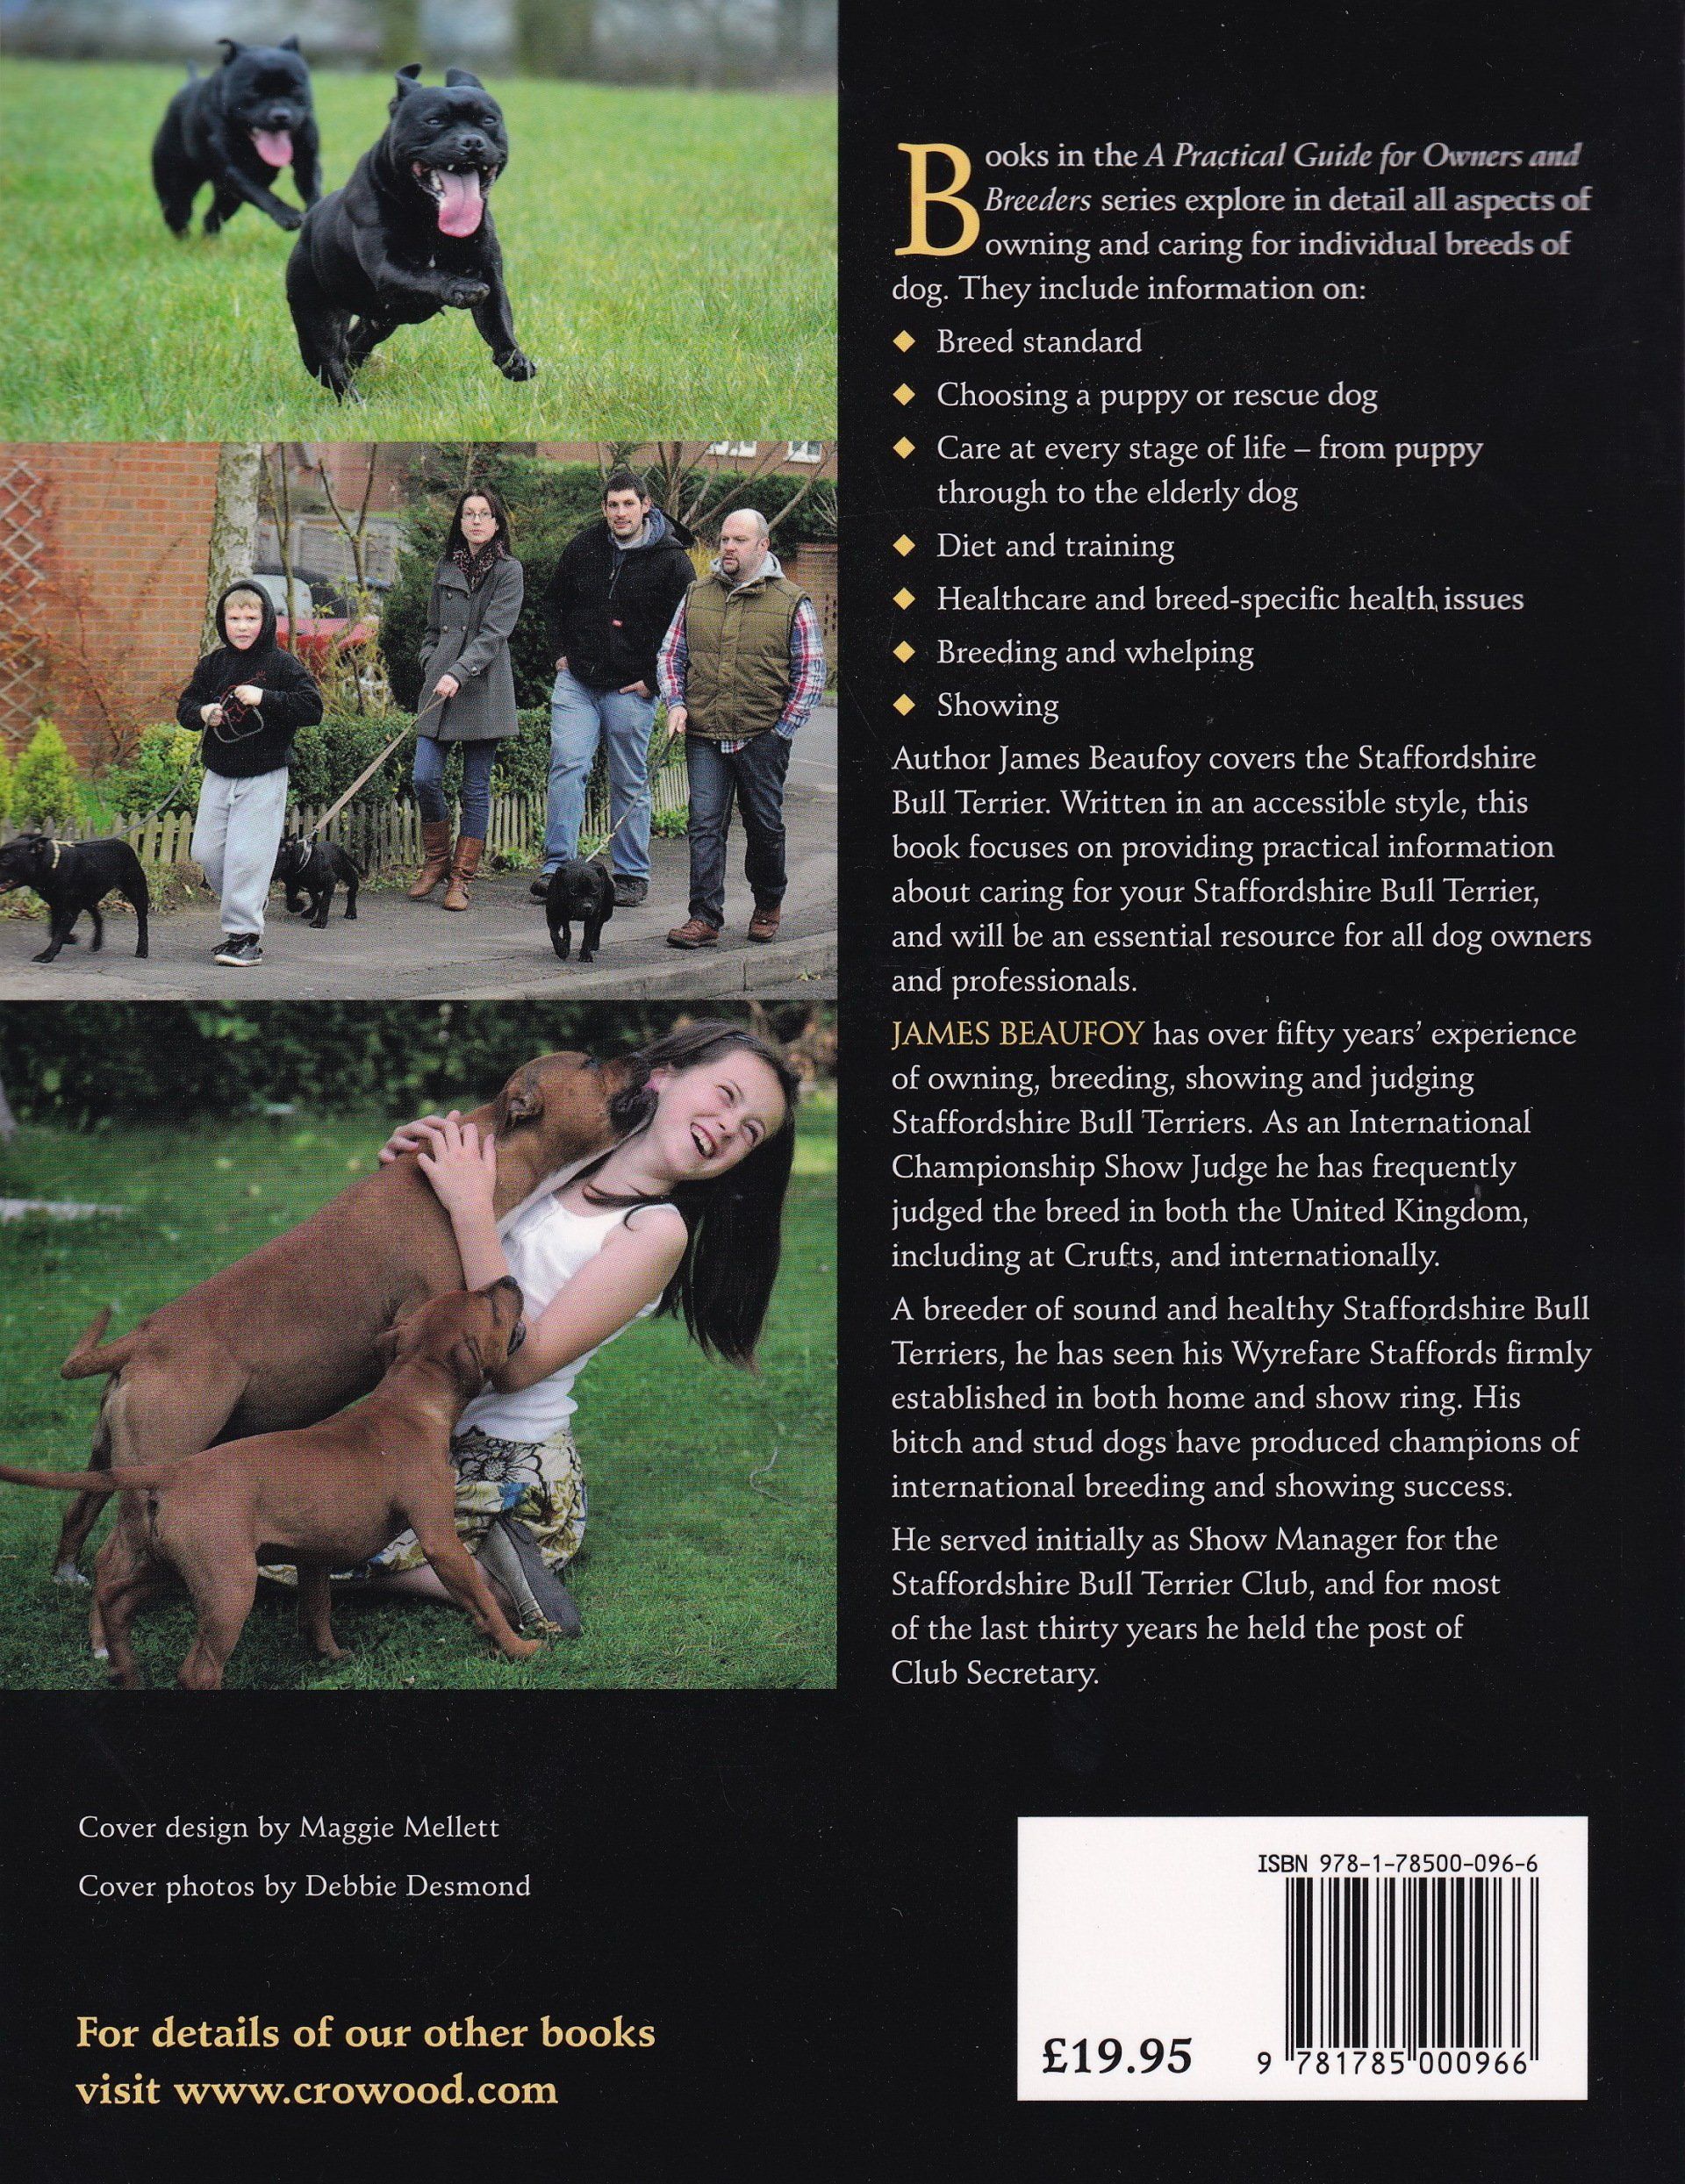 Staffordshire Bull Terriers: A Practical Guide for Owners and Breeders by James Beaufoy